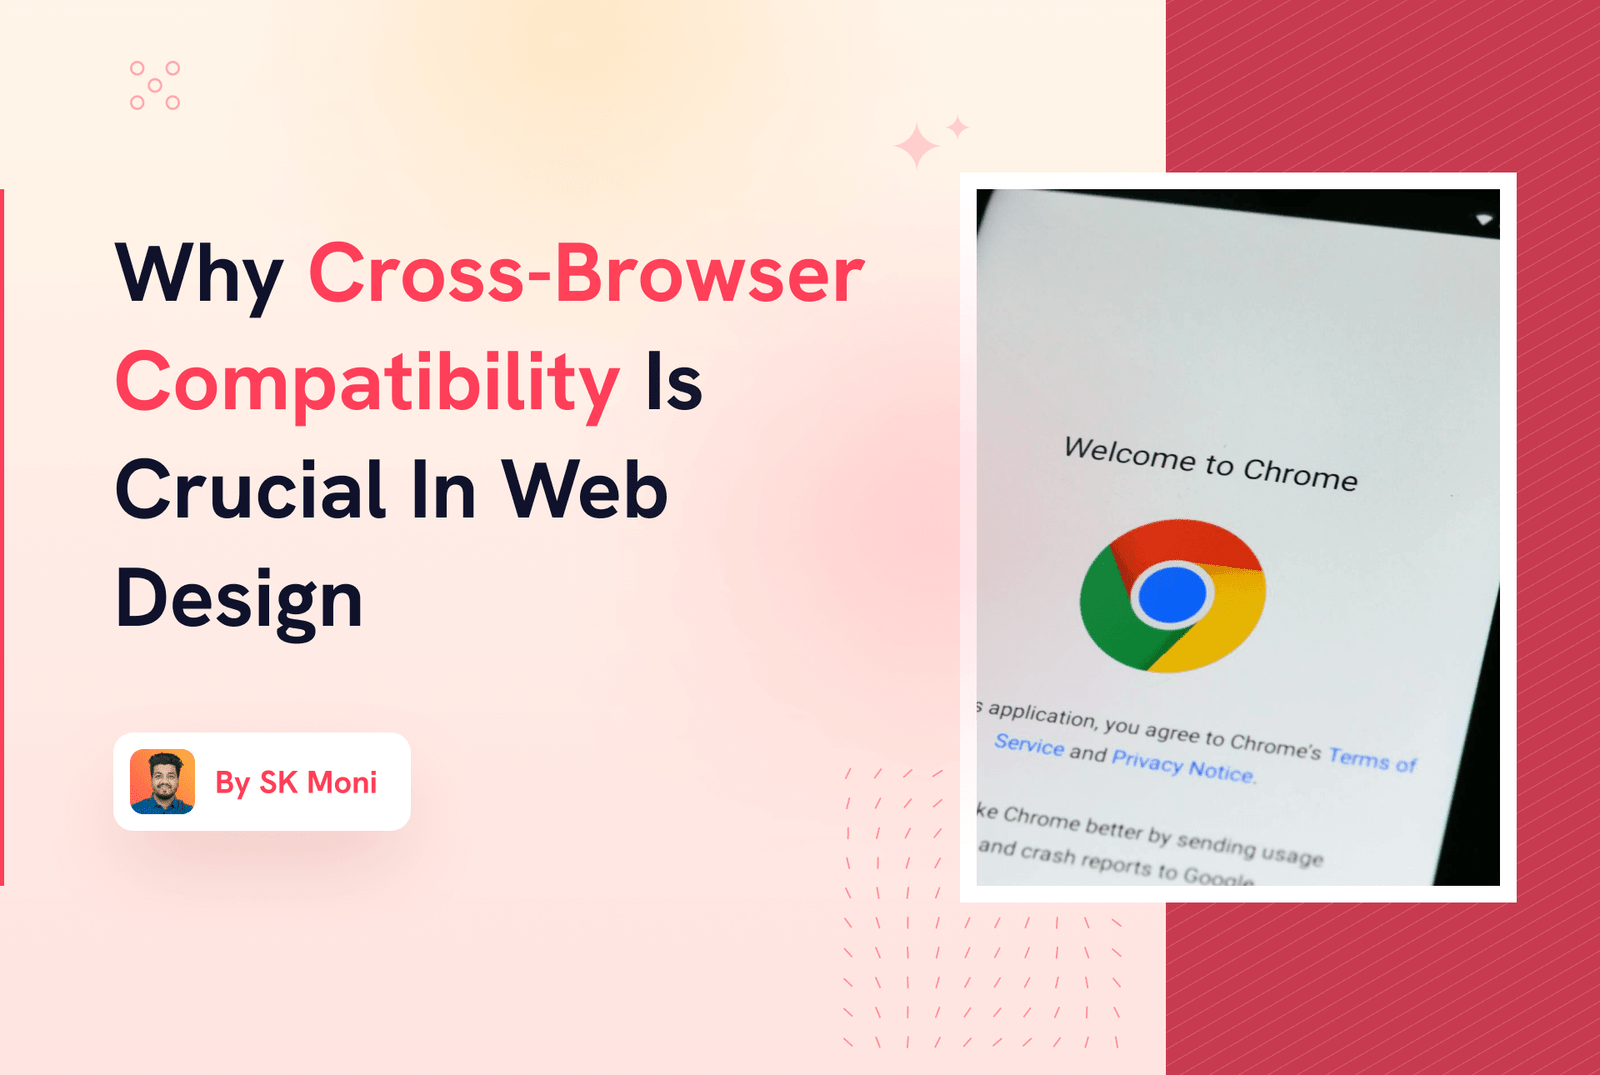 Why Cross-Browser Compatibility is Crucial in Web Design